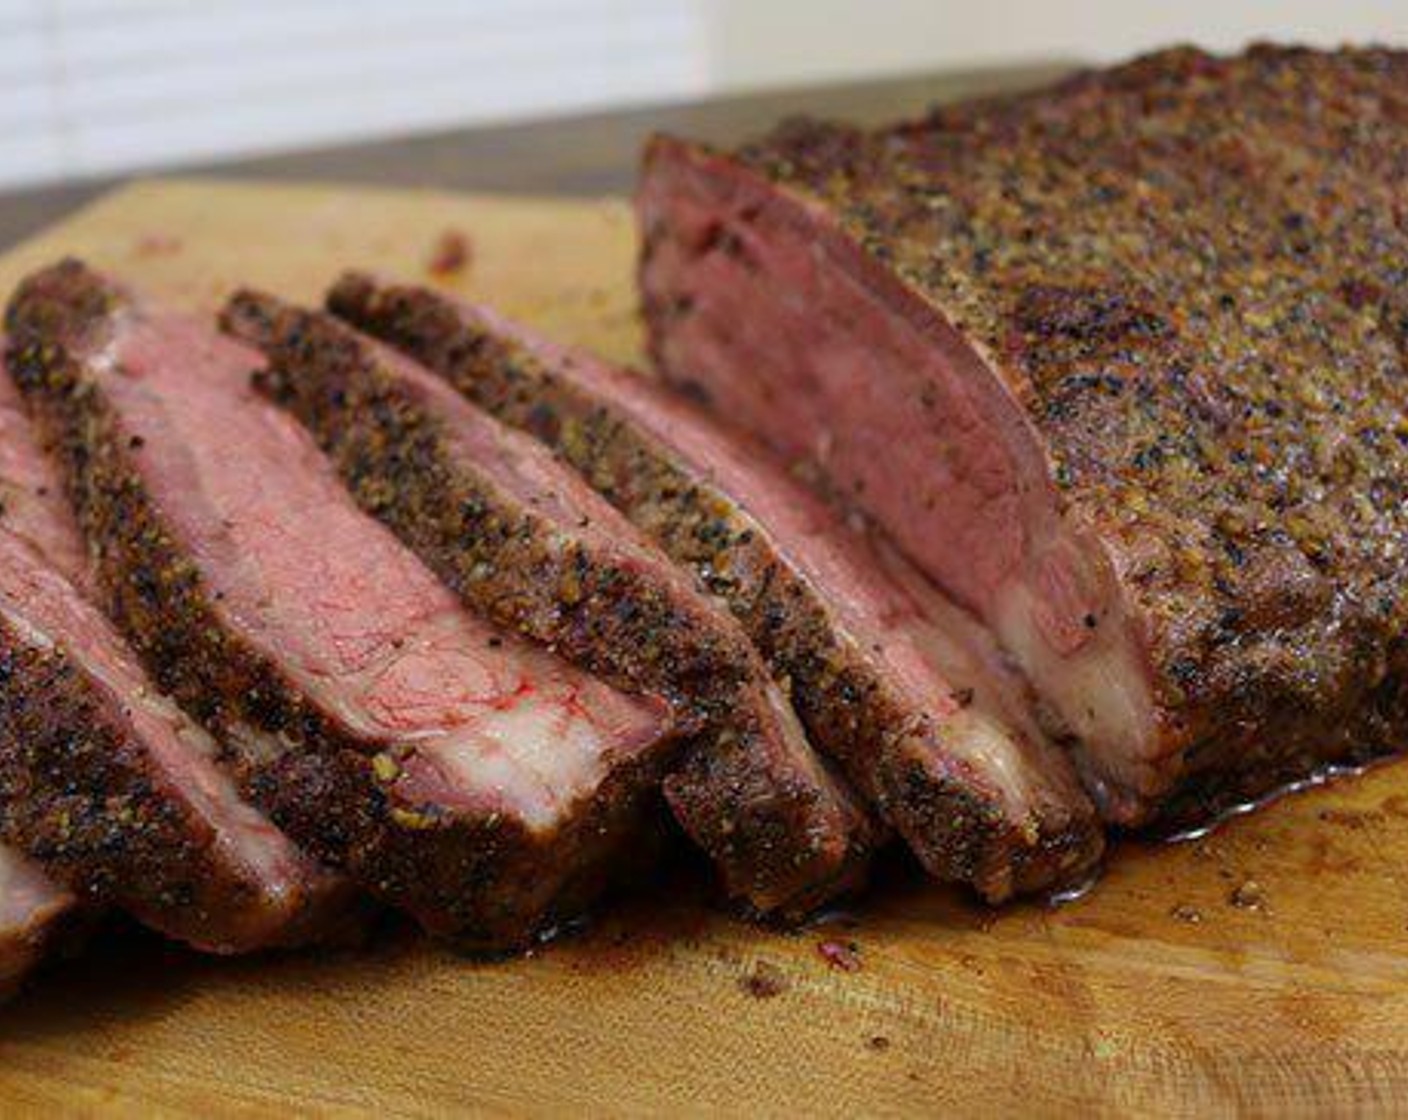 step 5 Serve the Smoked New York Strip Loin in ½” slices (about 12oz of meat) for dinner size servings. Be sure to collect the Jus from the platter to drizzle over it.